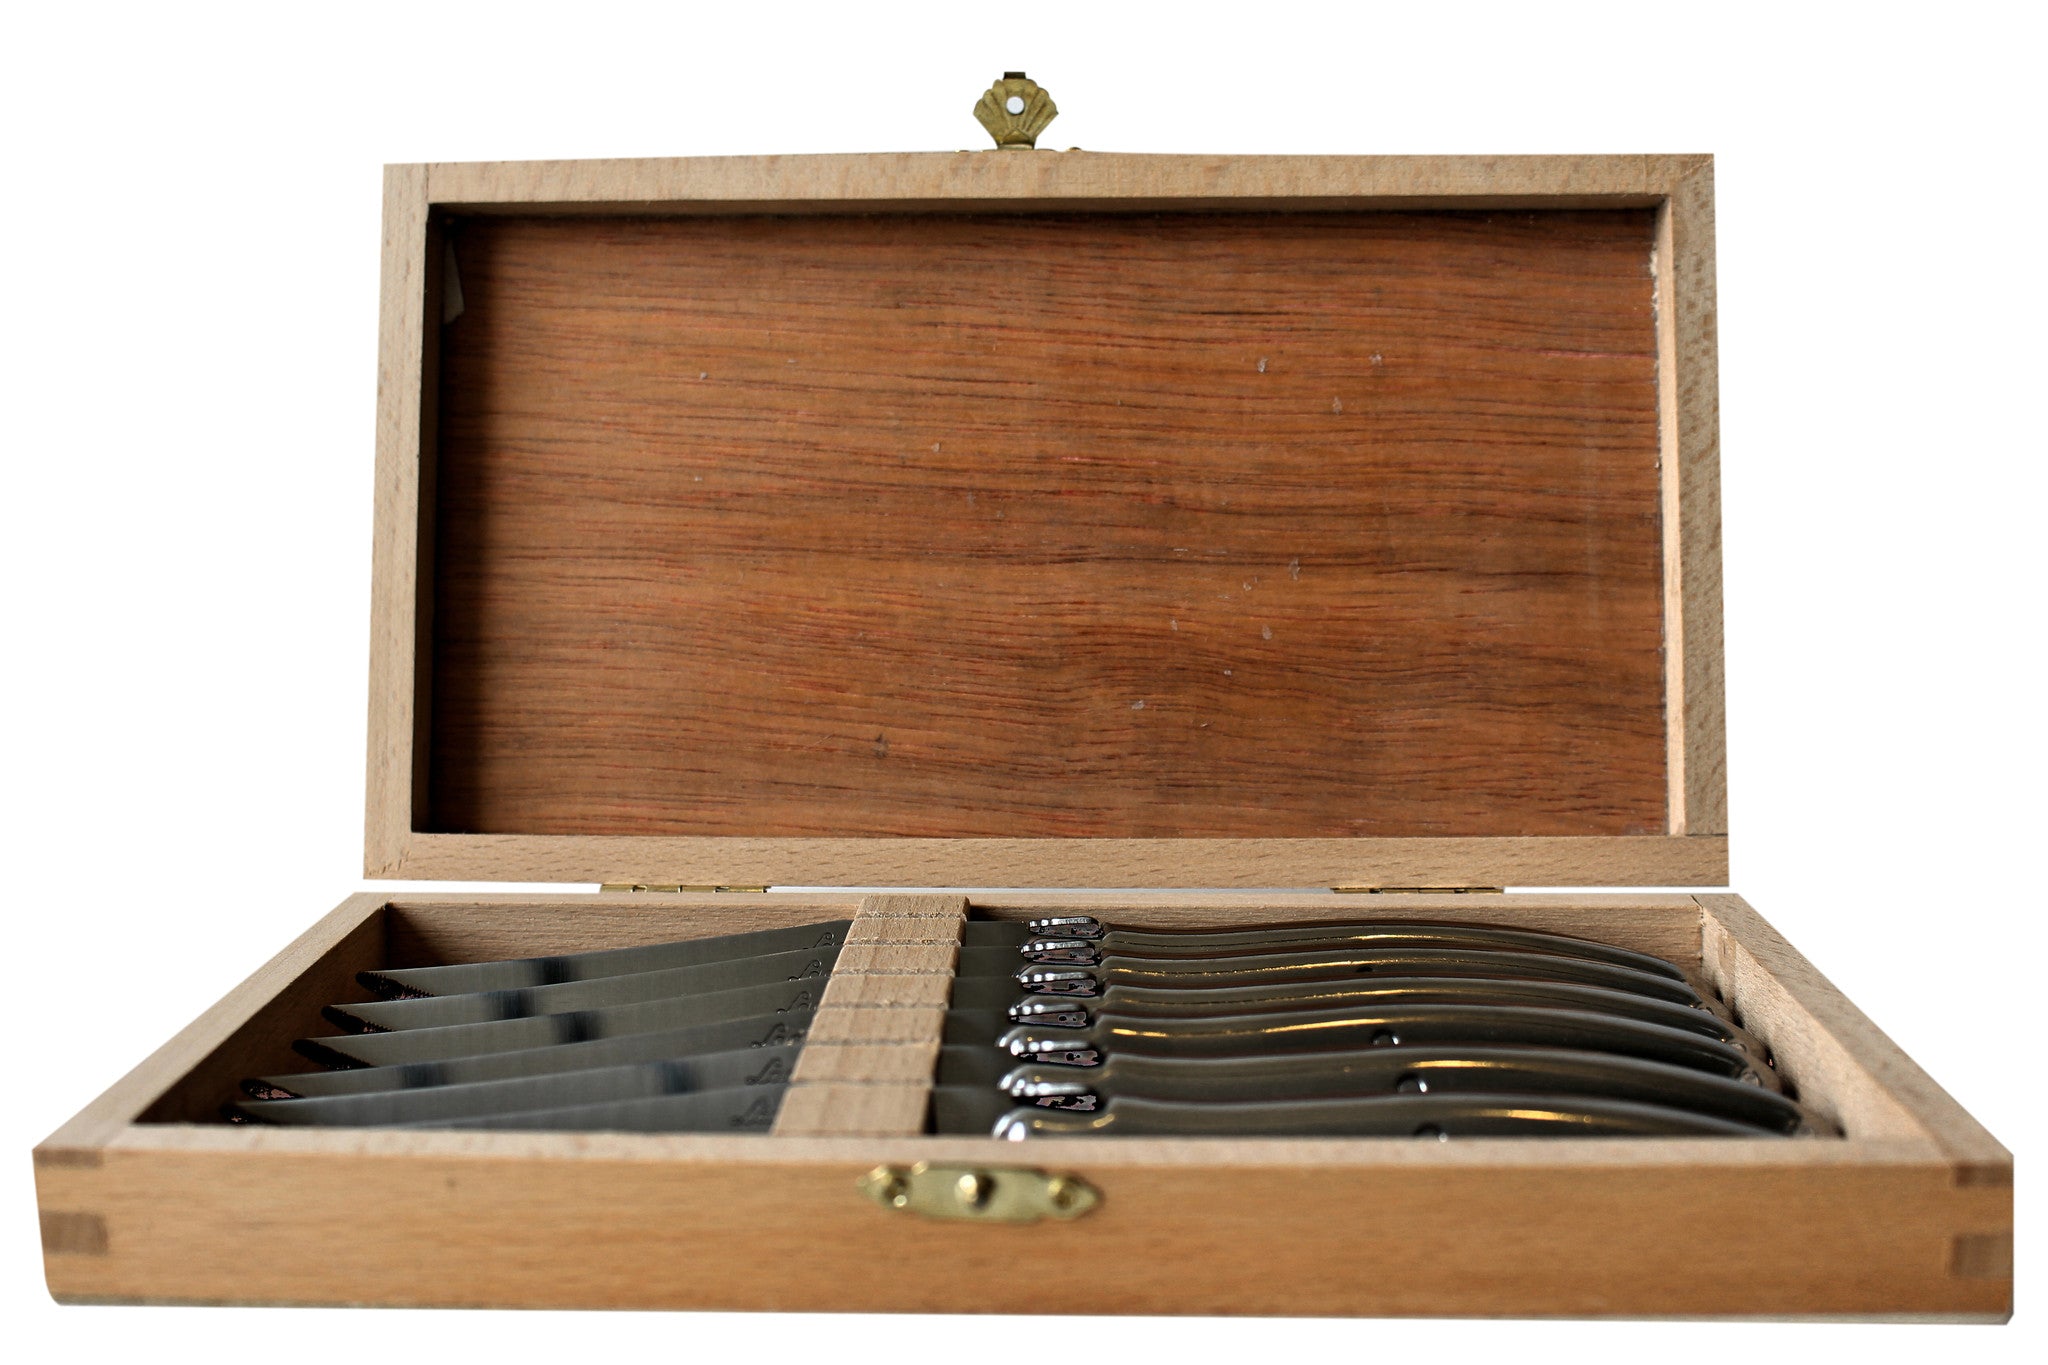 Laguiole Stainless Steel Knives in Presentation Box (Set of 6) Cutlery Laguiole Brand_Laguiole Flatware Sets Kitchen_Dinnerware Kitchen_Kitchenware Laguiole S6_Steel_Knives